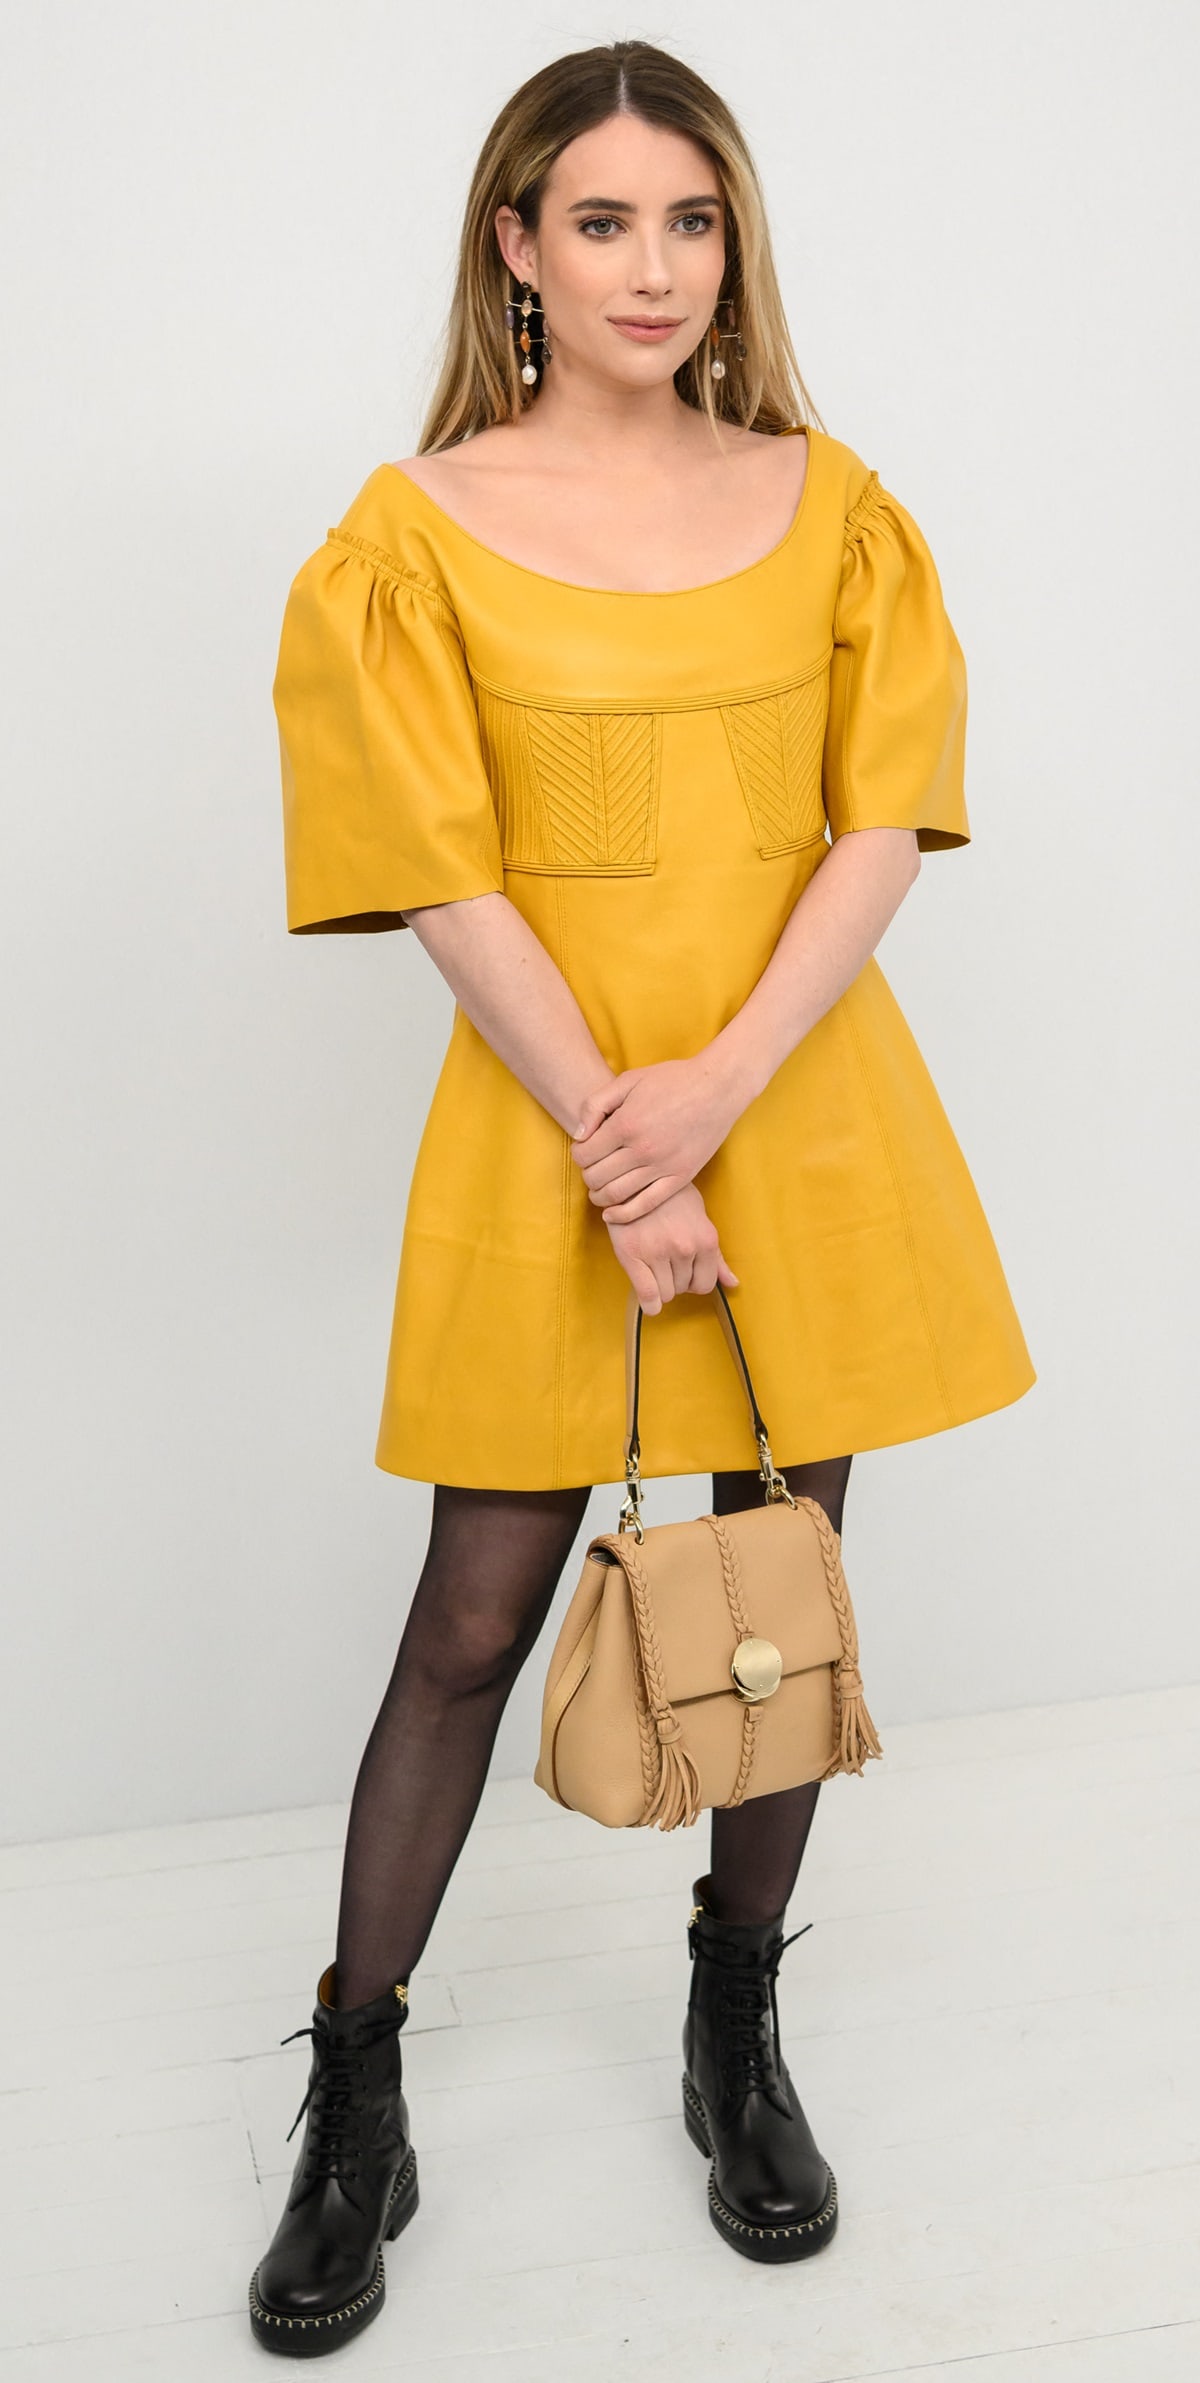 Emma Roberts attended Chloé's fall 2023 show on March 2, 2023, during Paris Fashion Week, dressed in a golden yellow leather mini dress, sheer black tights, lace-up boots, and accessorized with Chloé's multicolored stone and pearl drop earrings and a light tan Penelope leather satchel